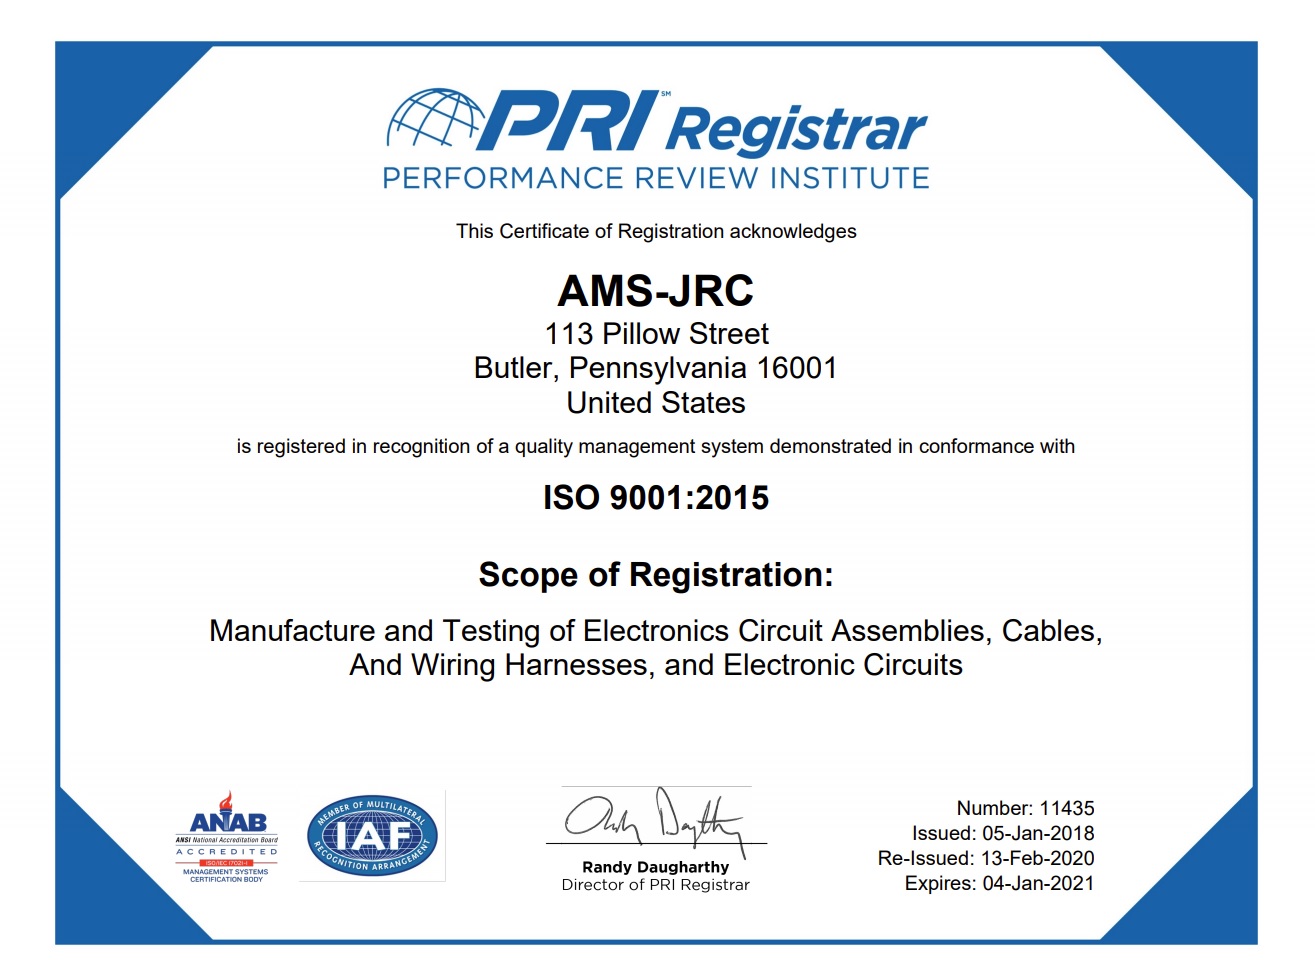 ISO CERTIFICATION ISO 9001:2015